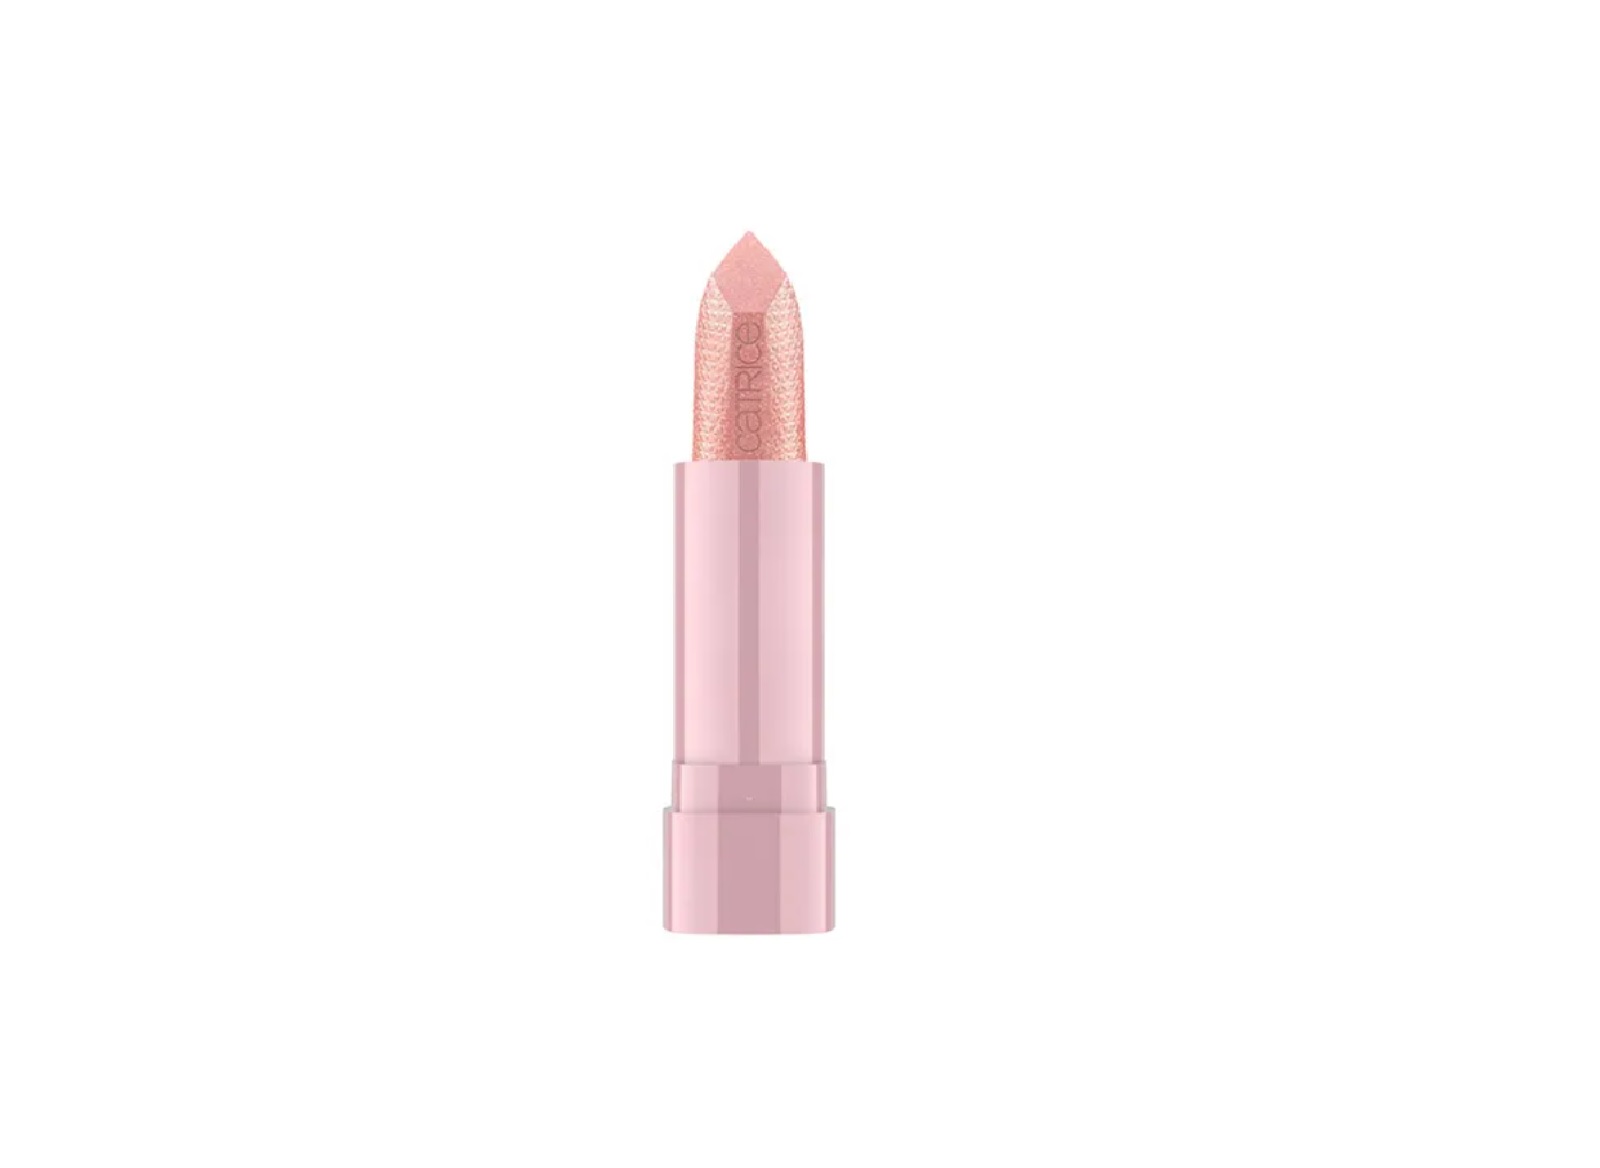 Leaves lips soft and hydrated with a natural, shimmering finish and a hint of colour.